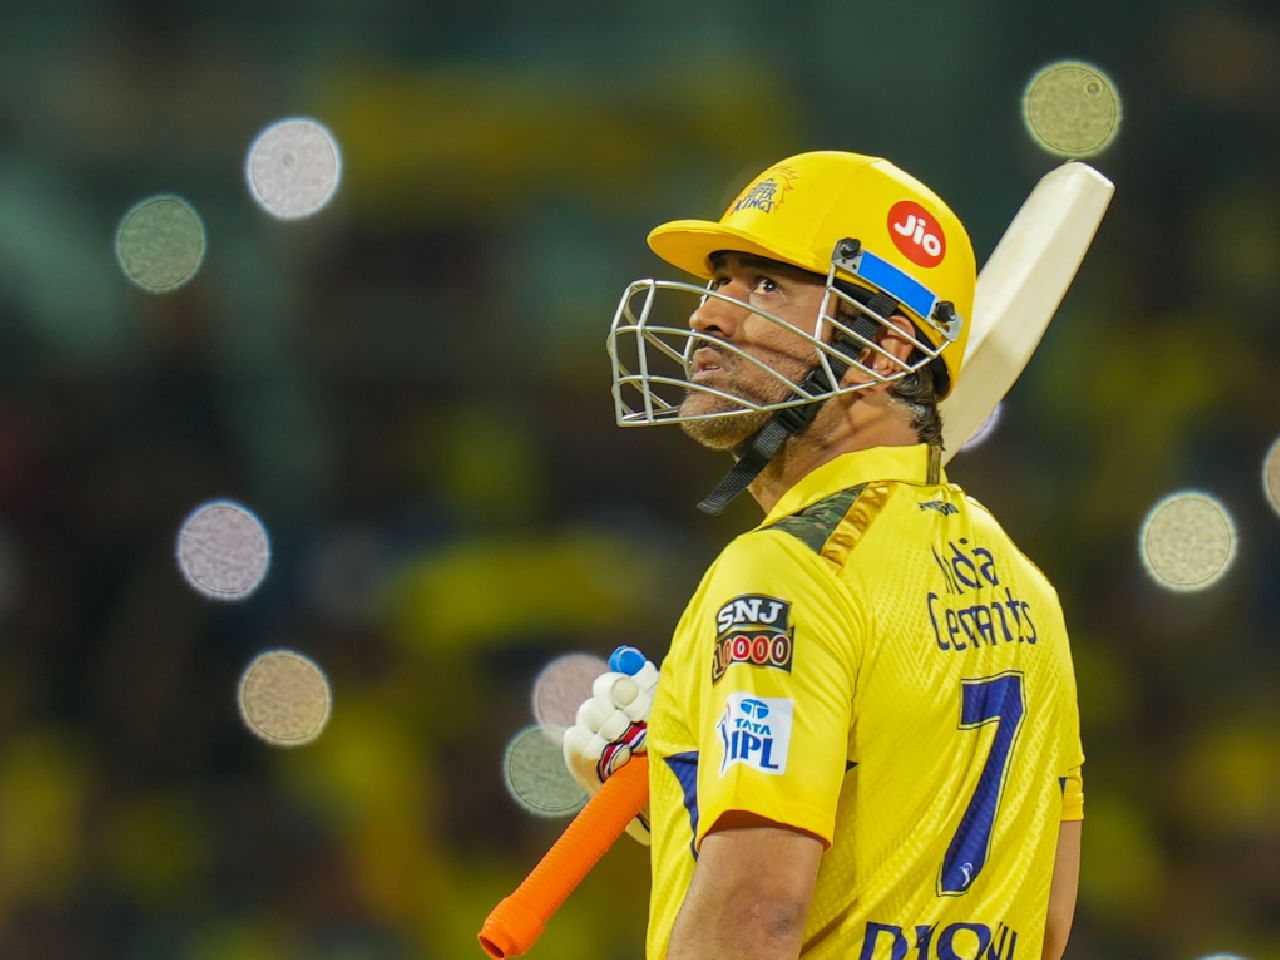 Gavaskar exhorts the finisher in Dhoni to step up again in 200th match as CSK skipper